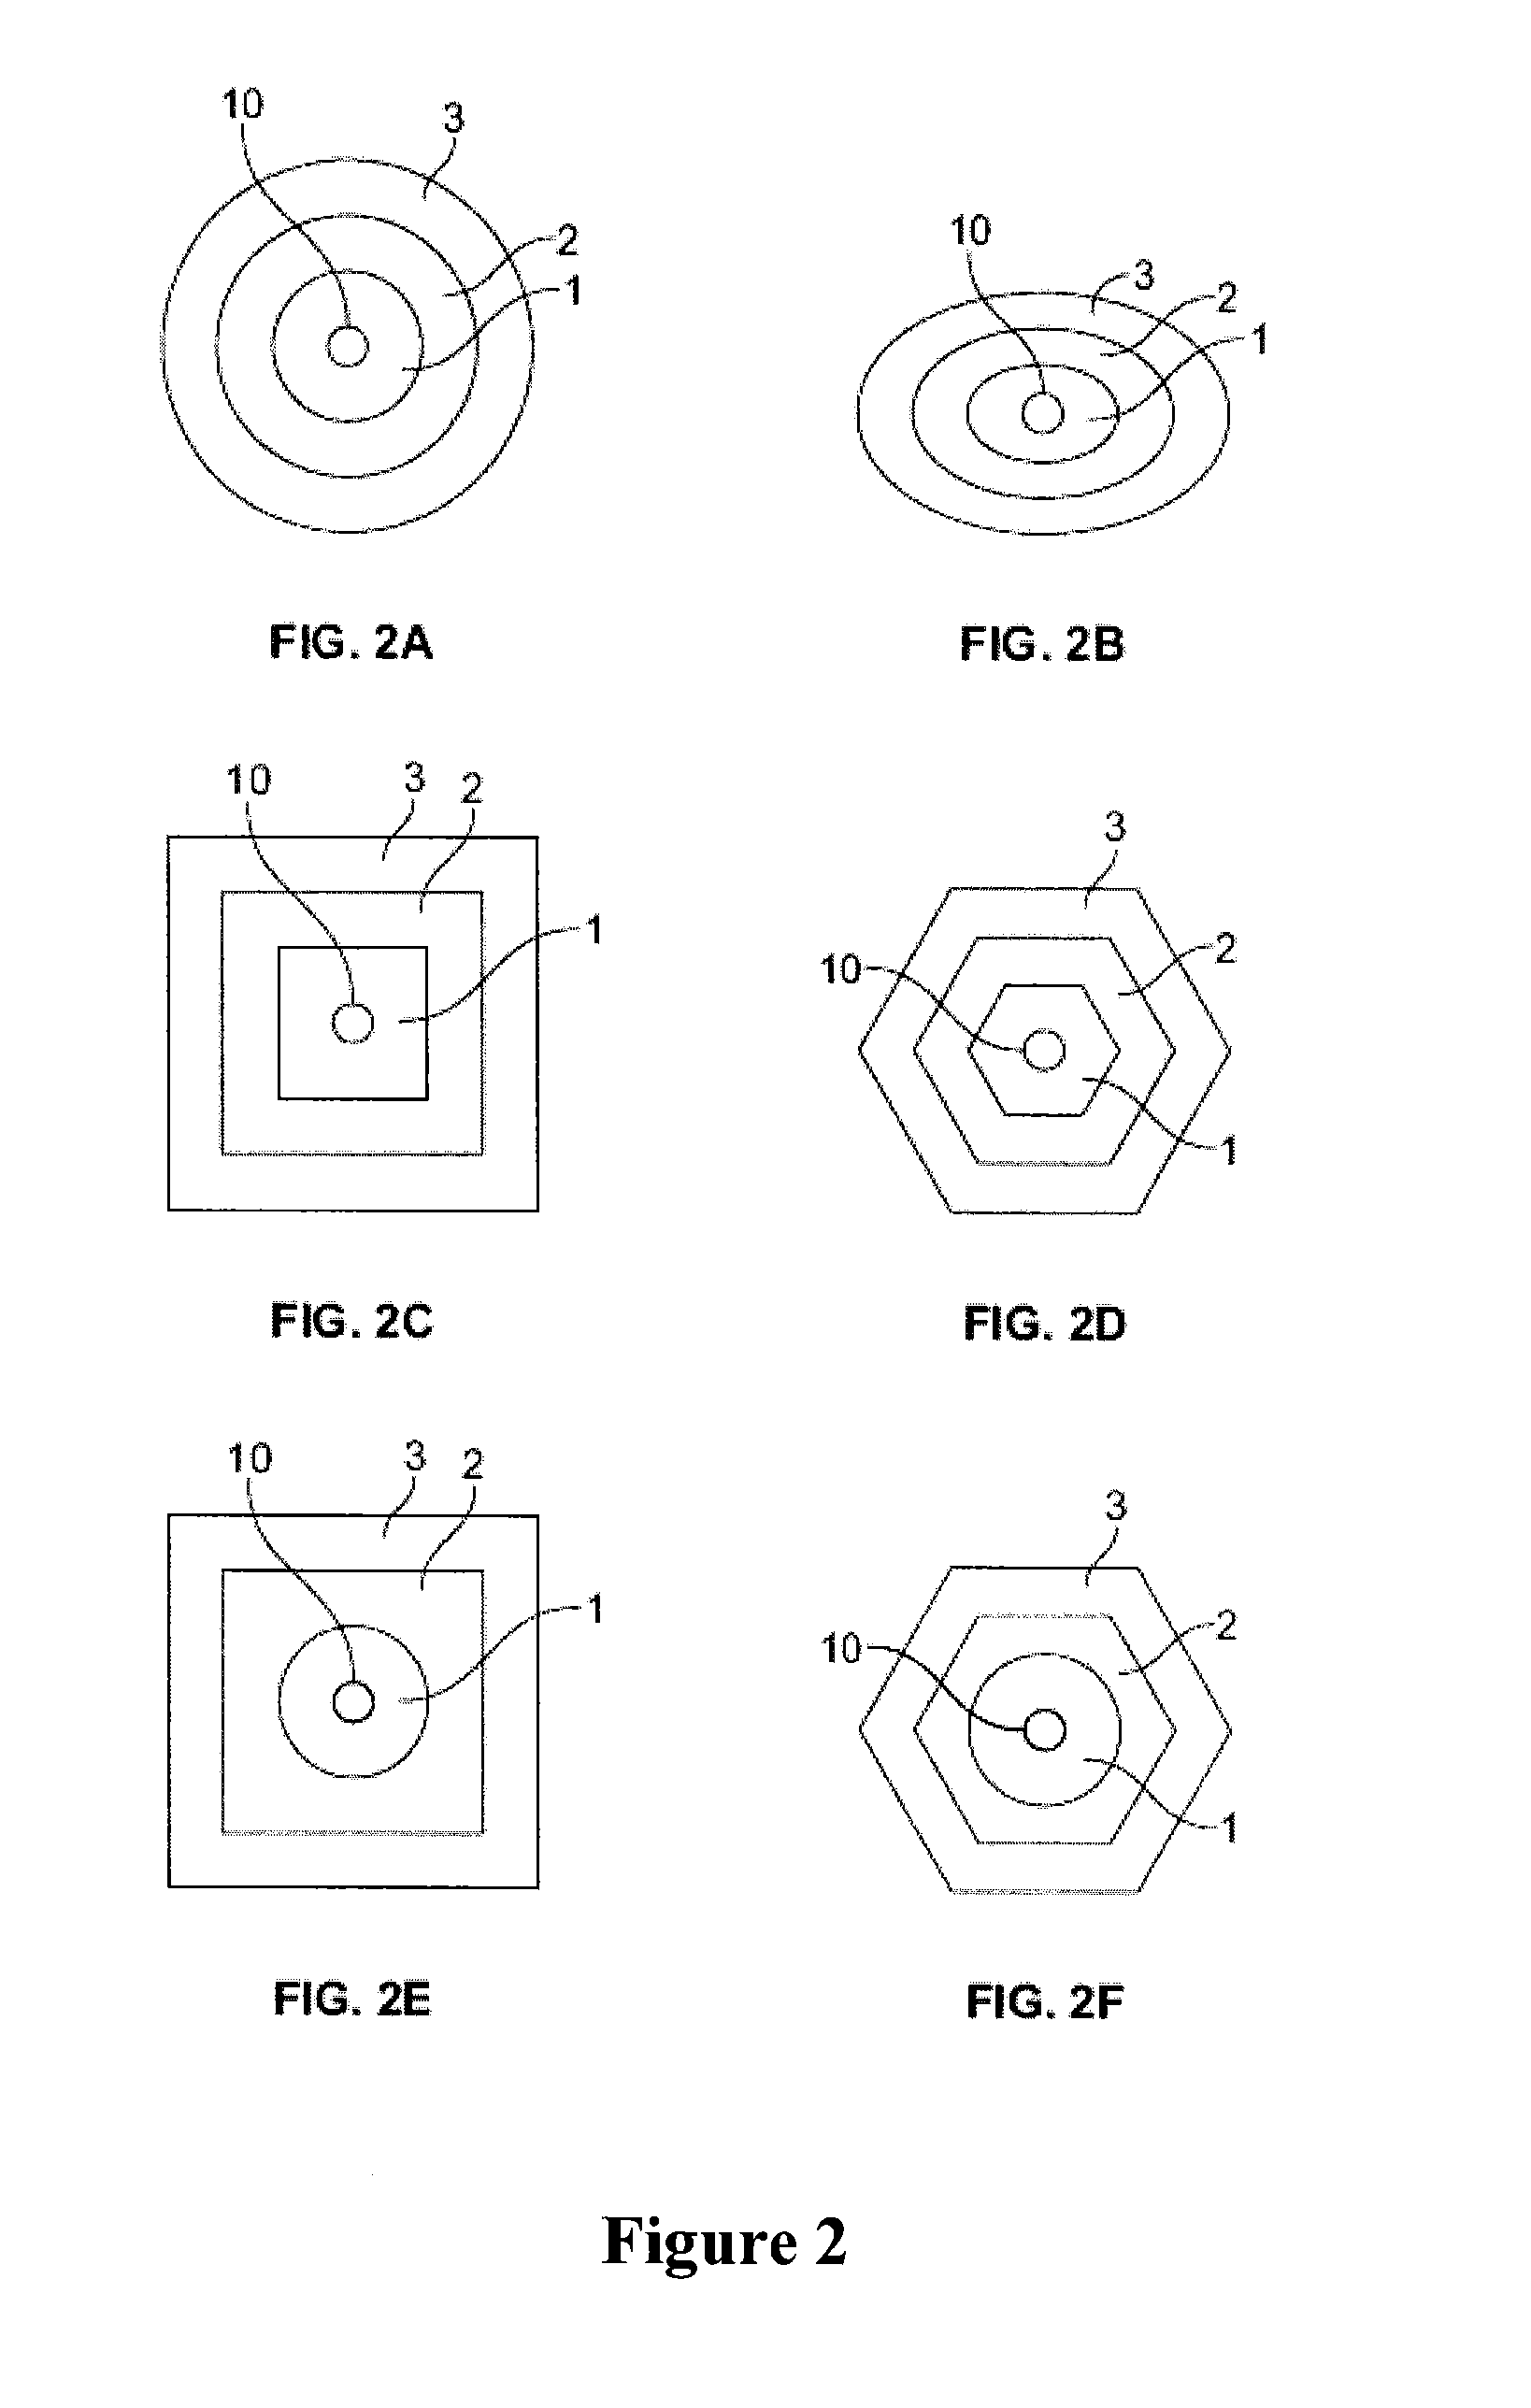 Preparation of cells, cell aggregates and tissue fragments